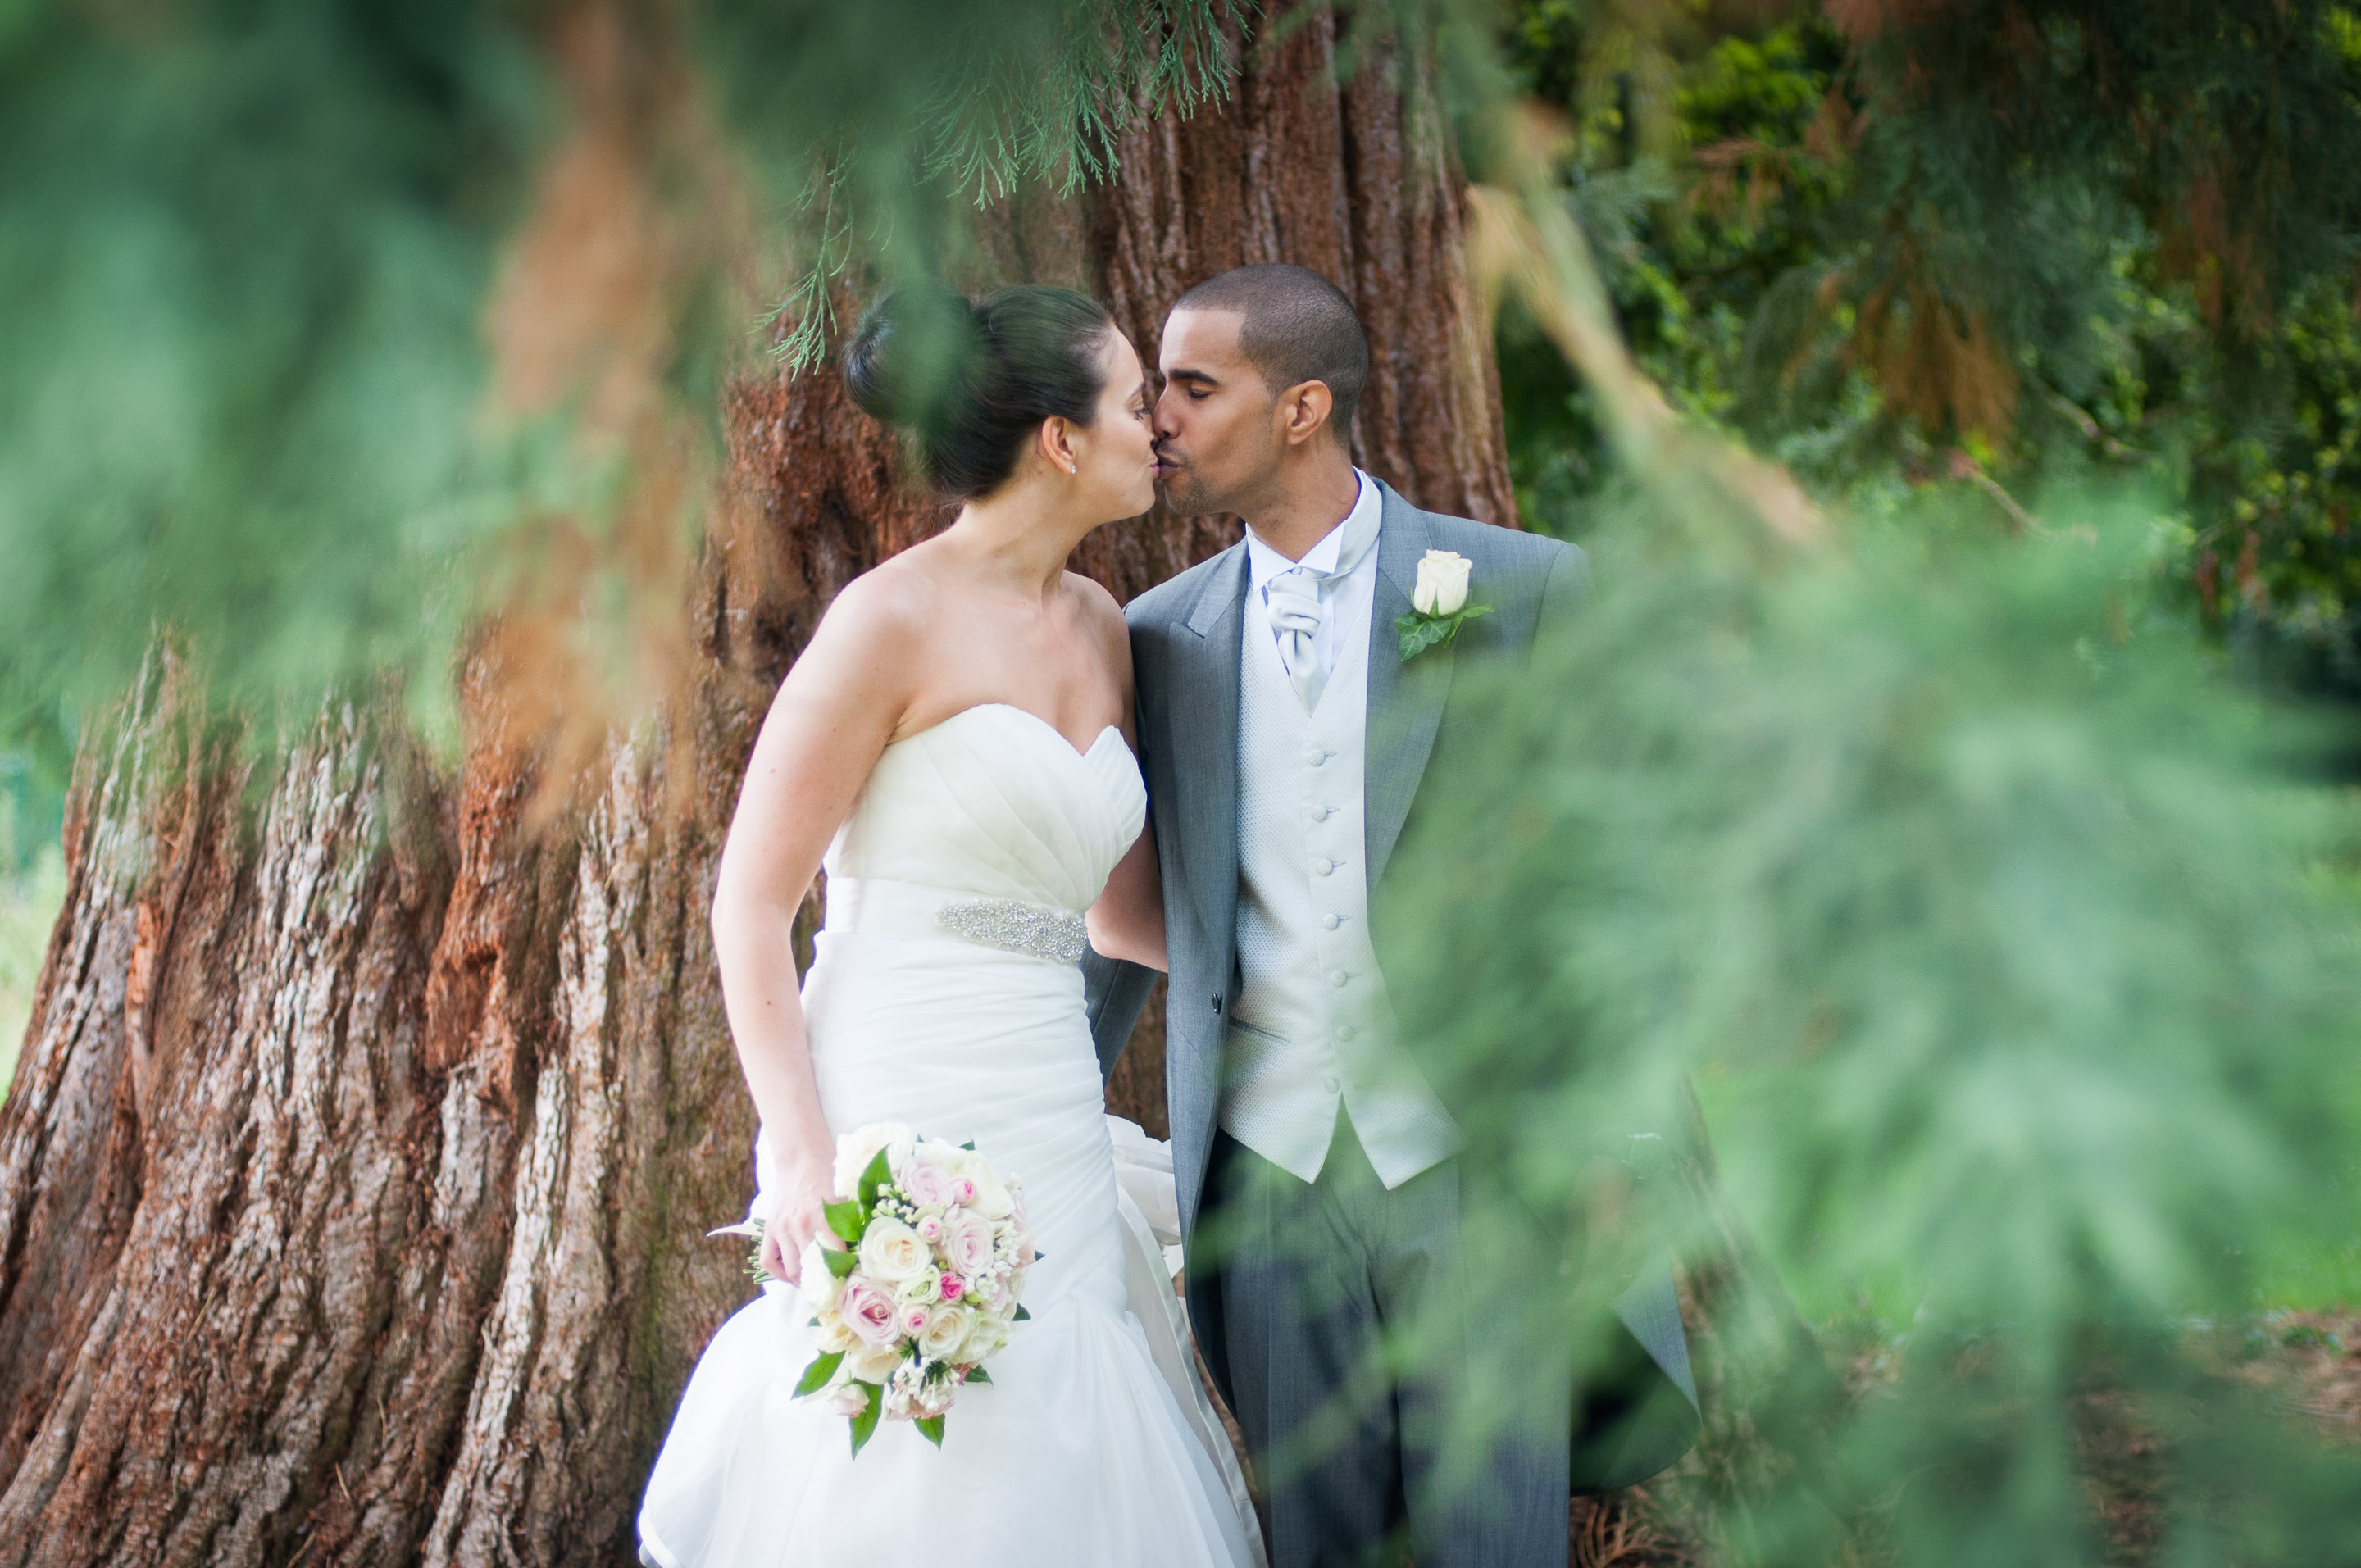 Bride and groom photographed through the trees